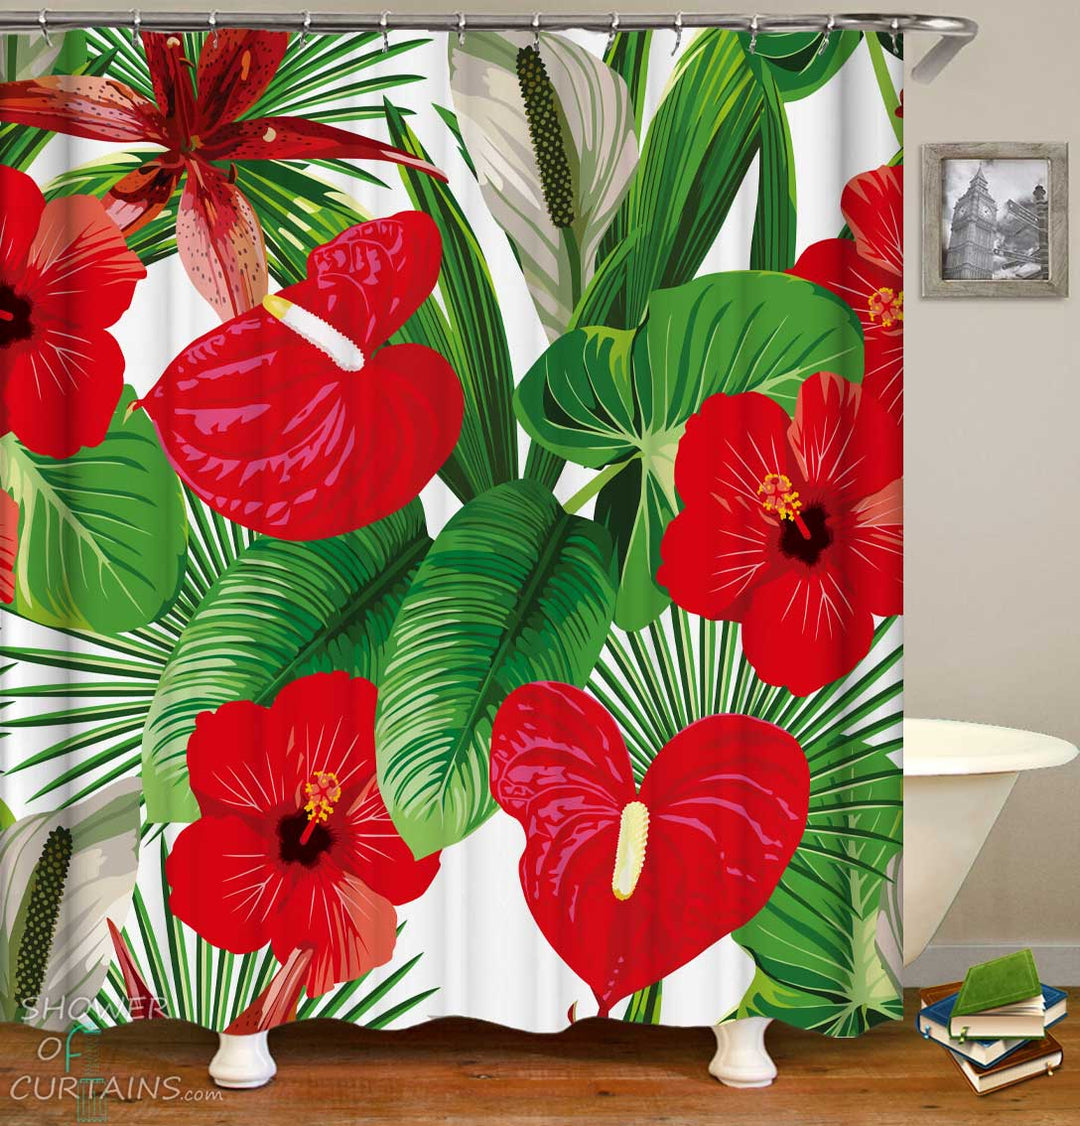 Shower Curtains with Vivid Red Tropical Flowers